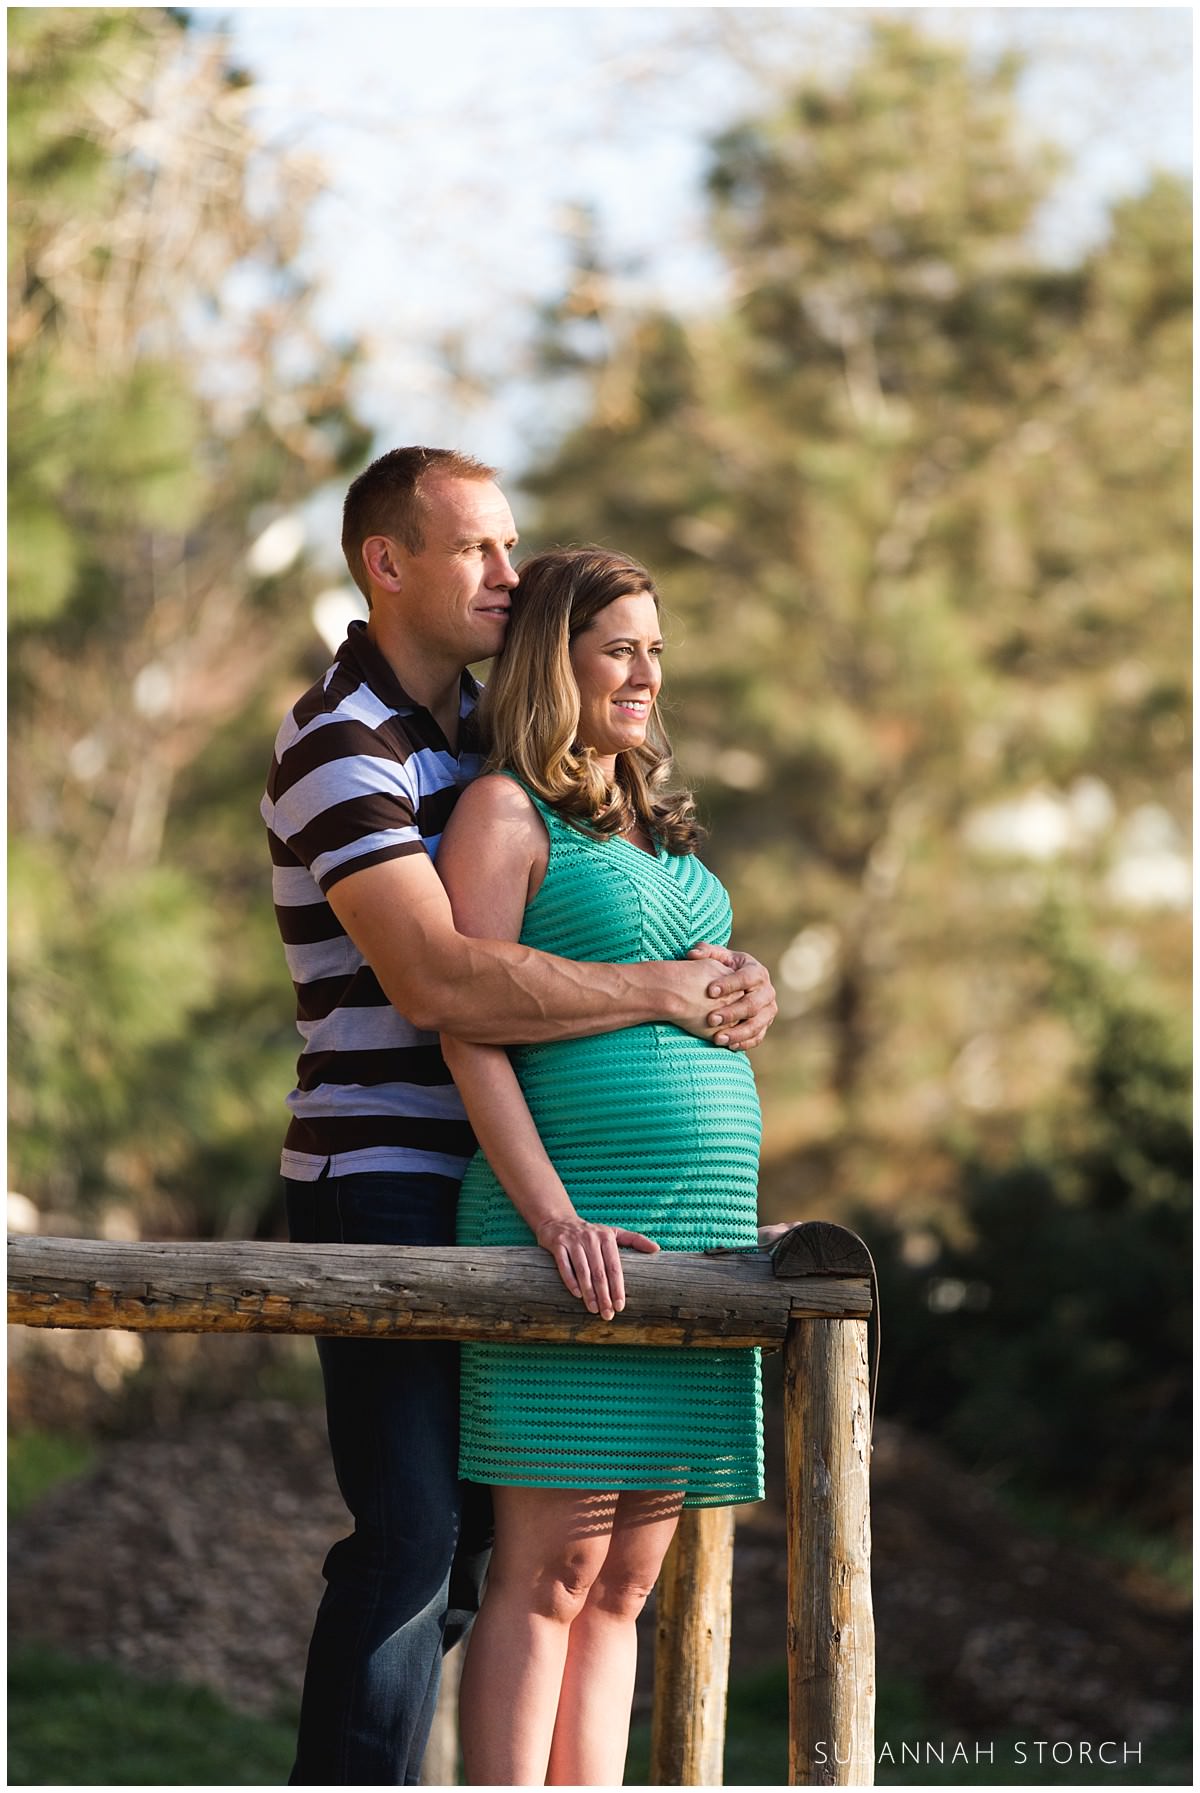 How to Rock Your Denver Maternity Photography Session